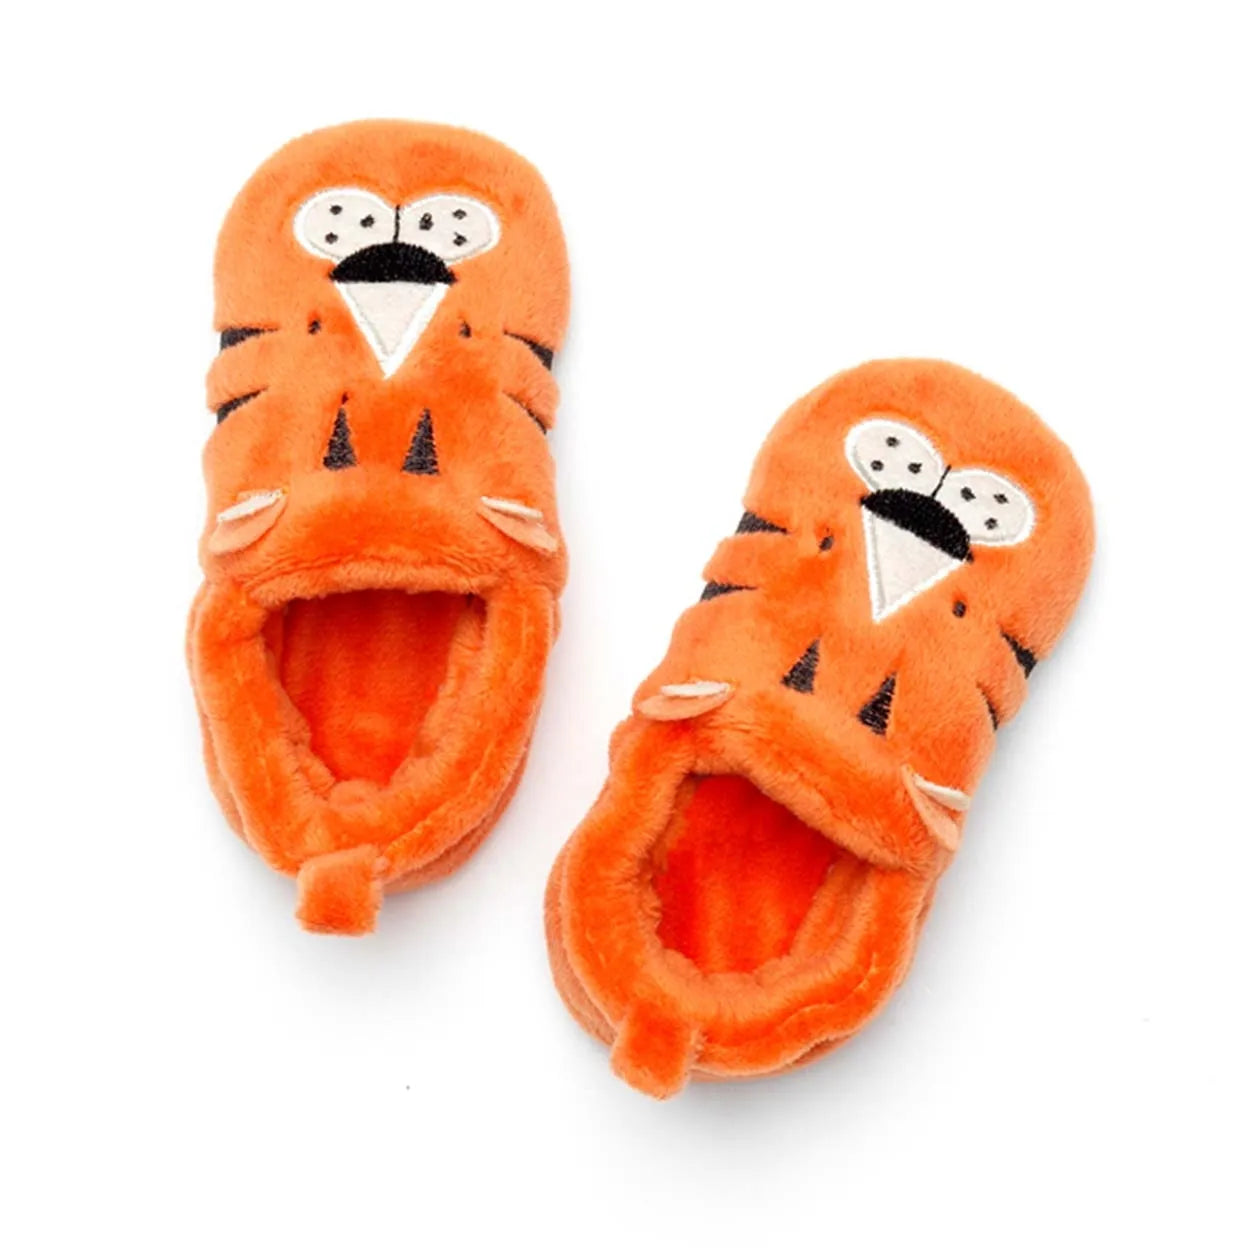 A pair of pull on unisex slippers by Chipmunks, style Tommy Junior, with tiger design in orange, white and black. View from above.